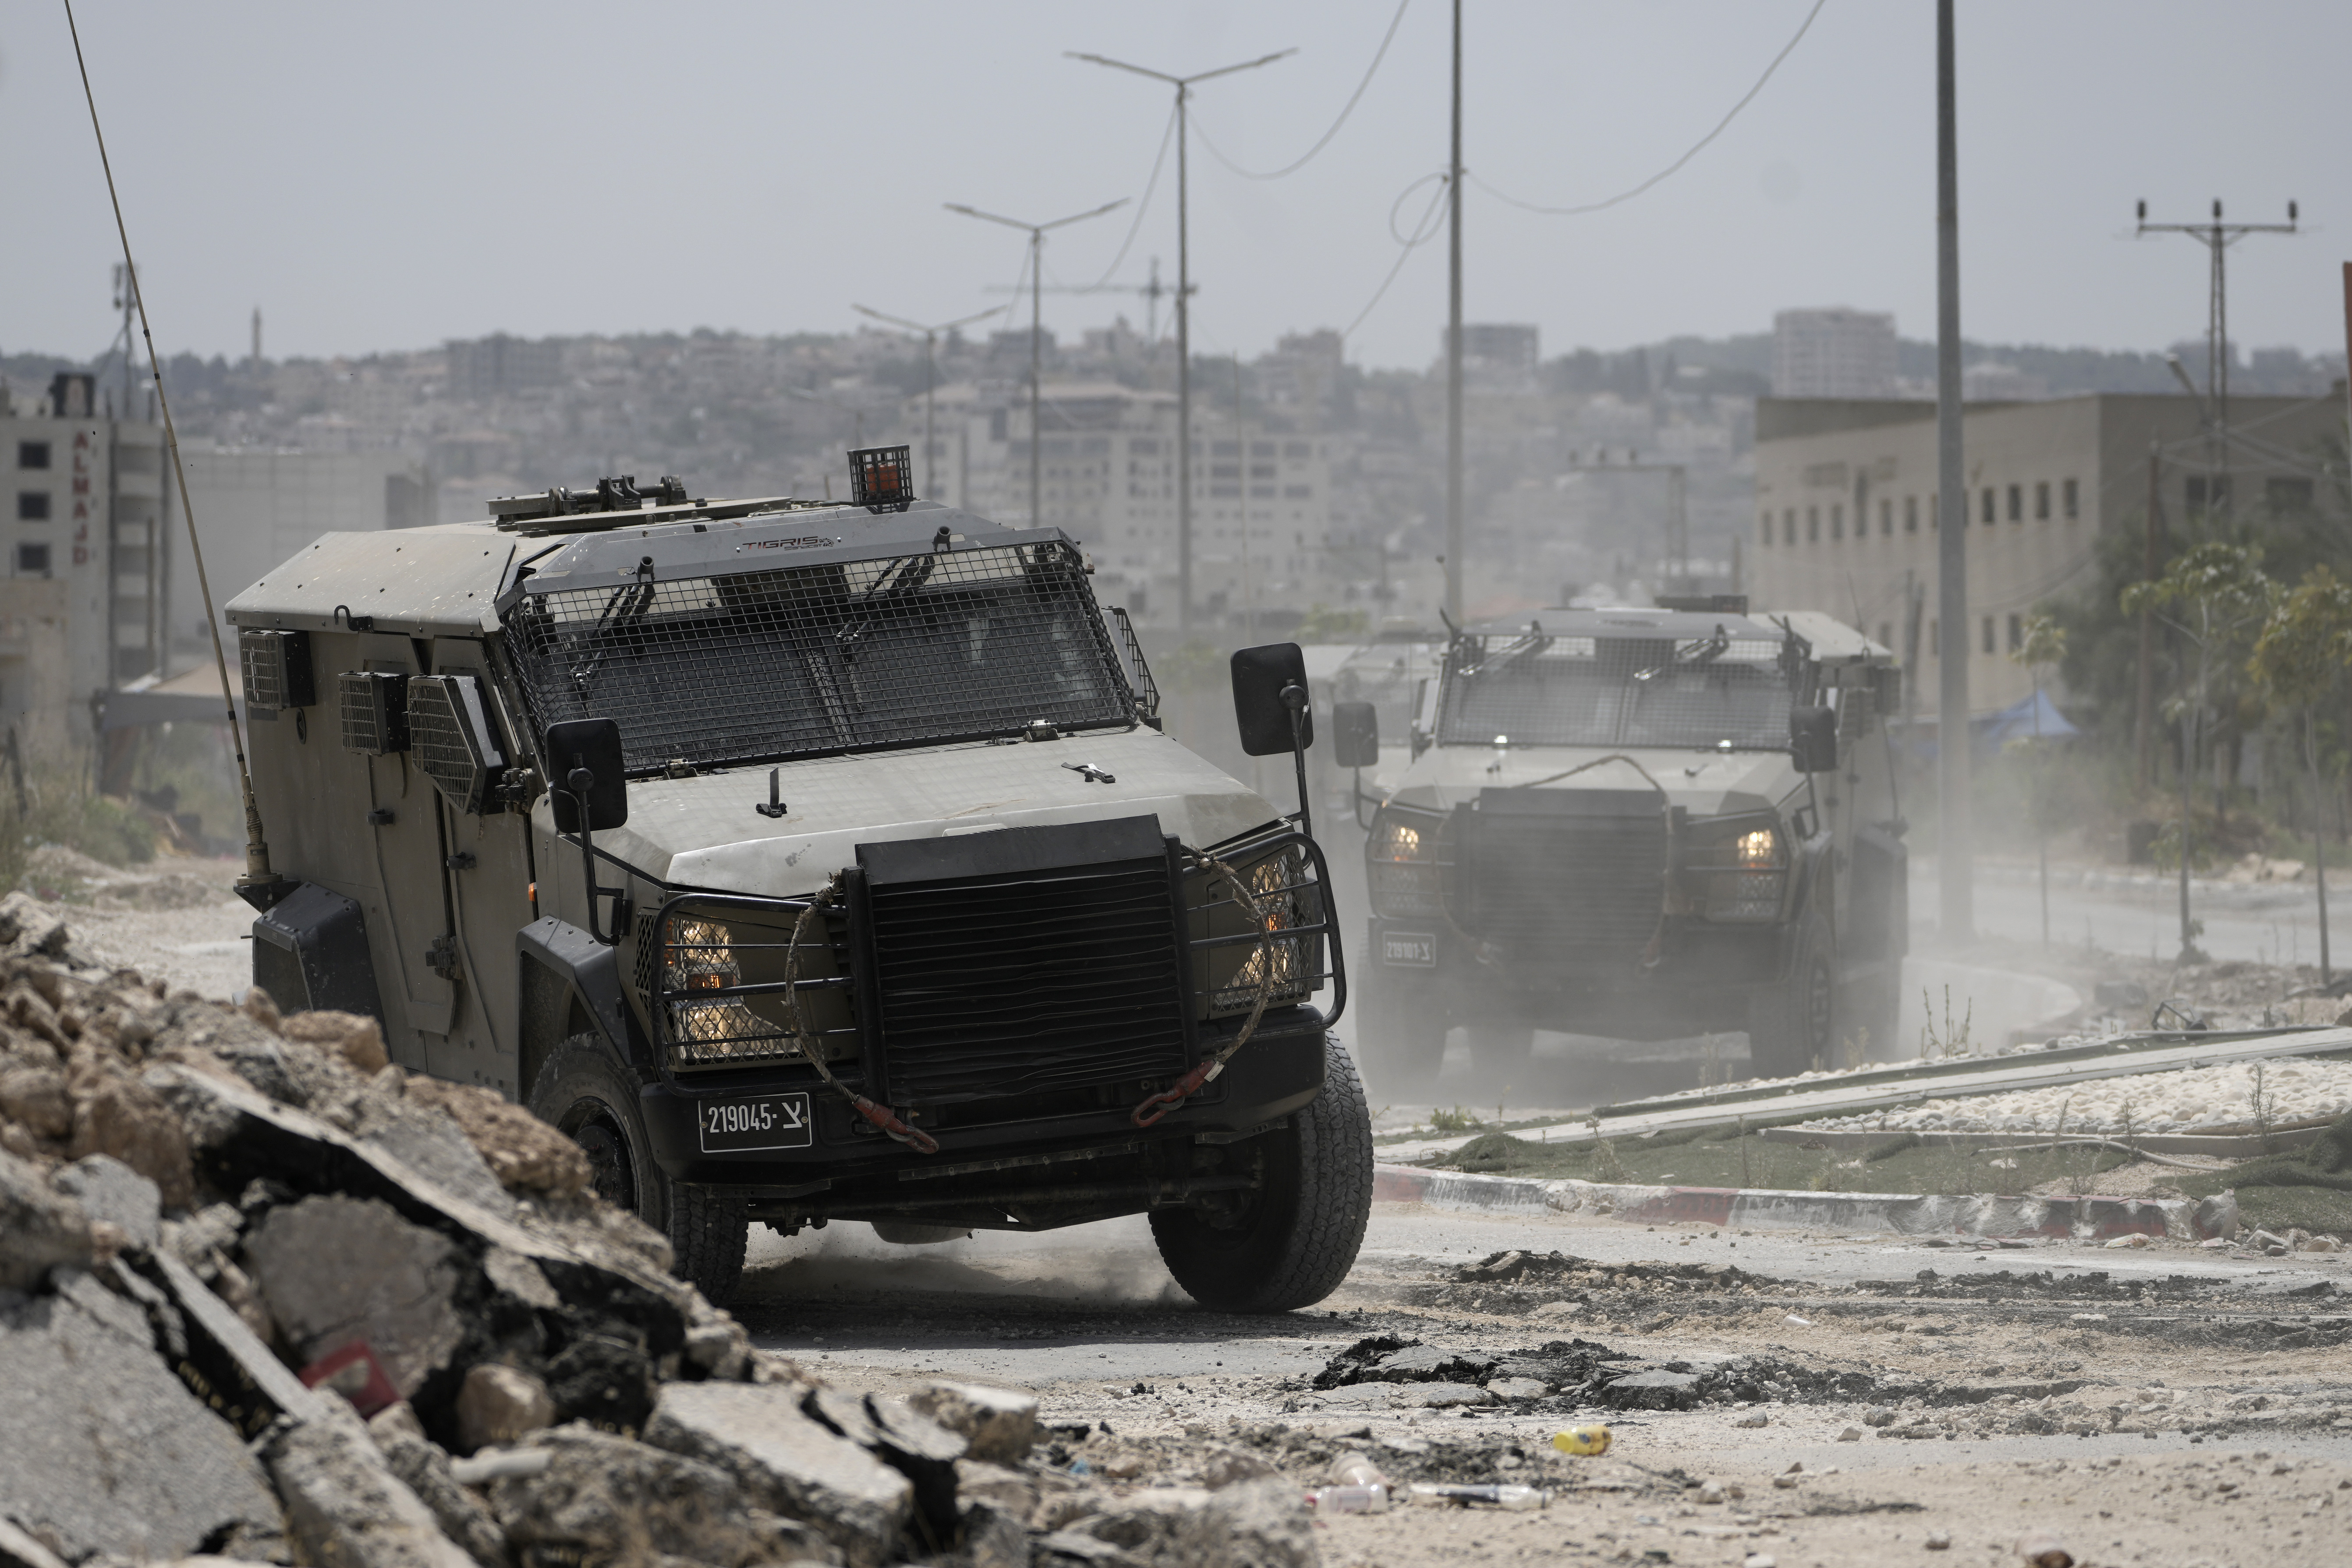 Israeli military vehicles maneuver during an operation in the West Bank city of Jenin, Friday, July 5, 2024. The Israeli military said Friday it was conducting counterterrorism activity that included an airstrike in the area of the West Bank city of Jenin. Palestinian authorities said five people were killed. (AP Photo/Majdi Mohammed)